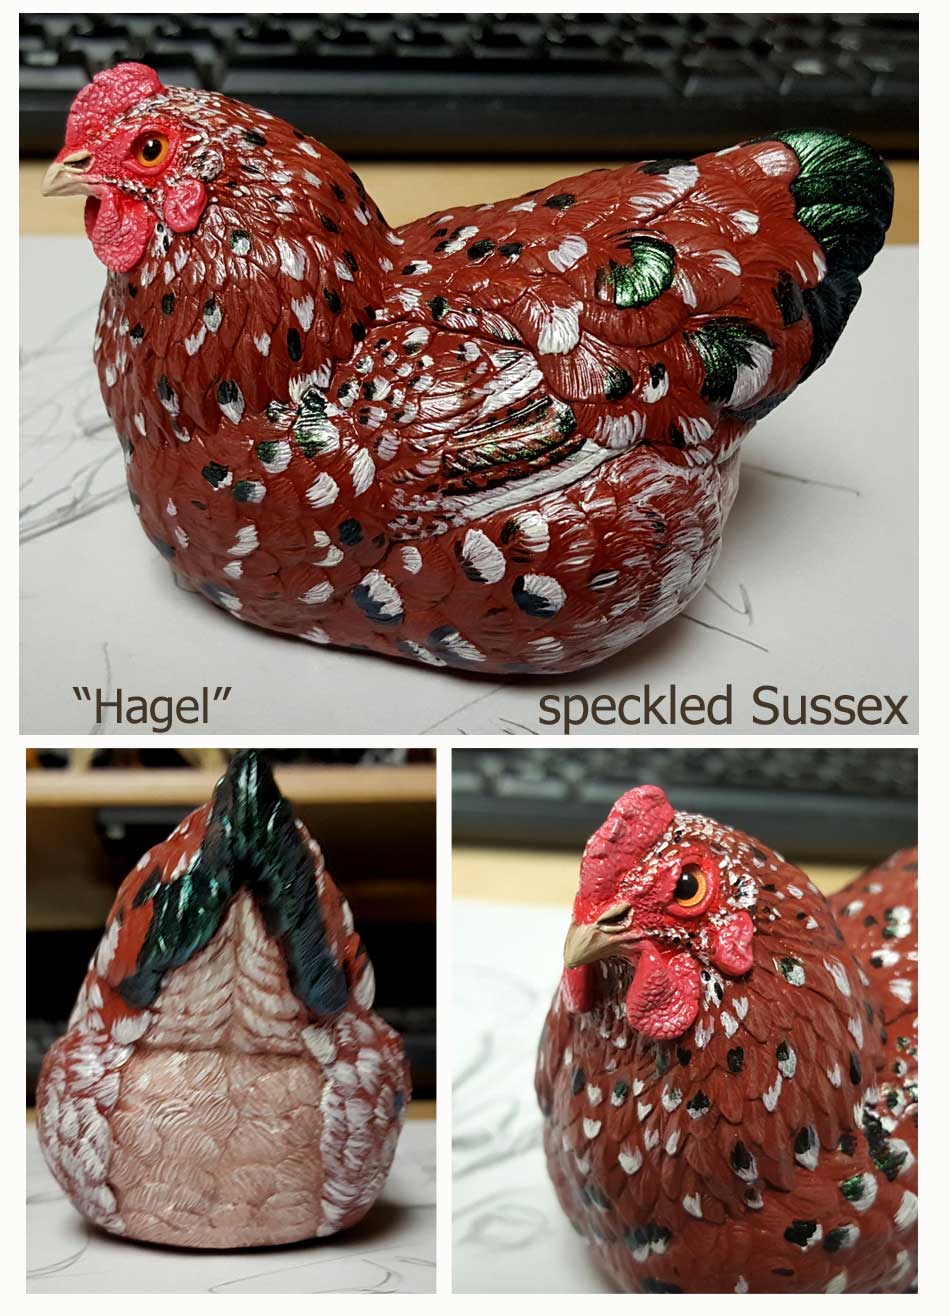 Hagel-the-speckled-sussex-chicken-from-Jennifer-Townsend-2022-sproing-swap